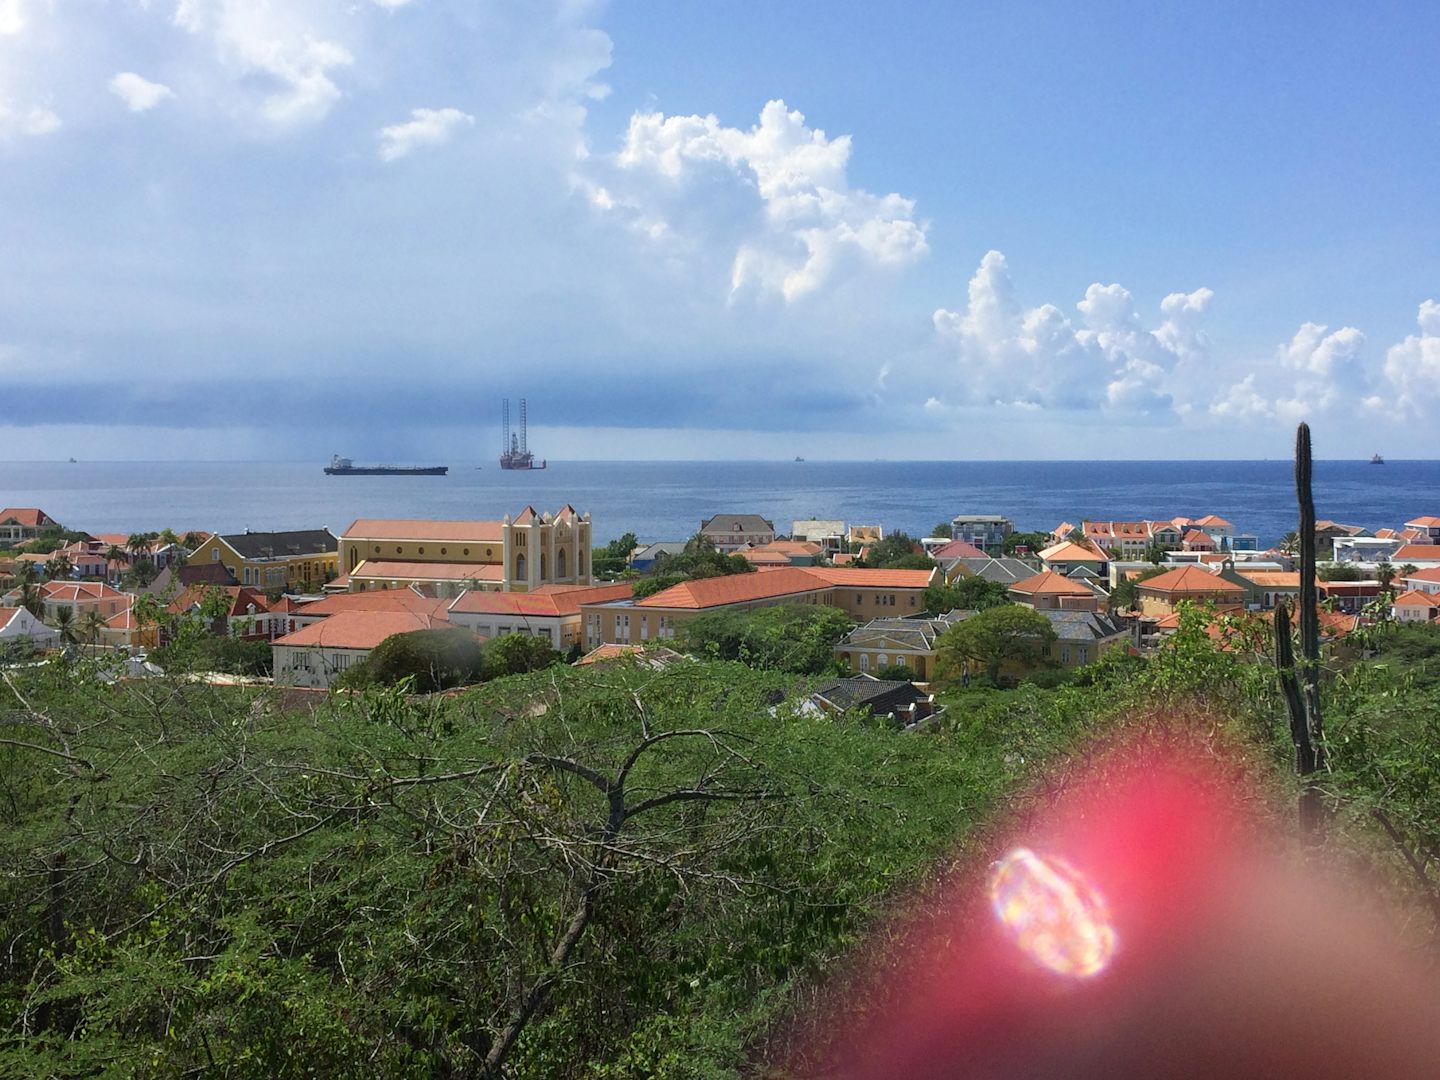 A view or Curacao